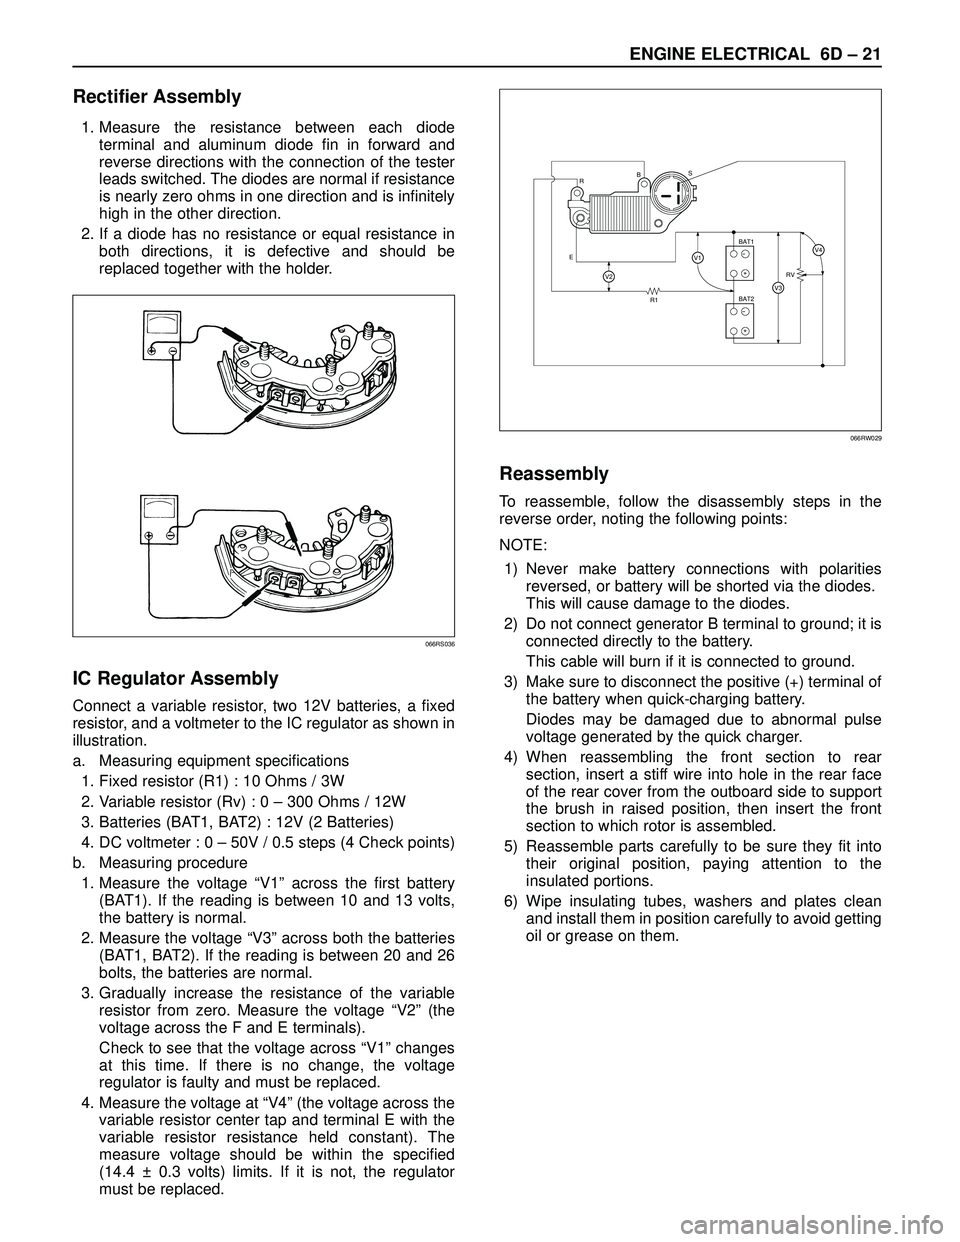 ISUZU TROOPER 1998  Service Manual PDF ENGINE ELECTRICAL 6D – 21
Rectifier Assembly
1. Measure the resistance between each diode
terminal and aluminum diode fin in forward and
reverse directions with the connection of the tester
leads sw